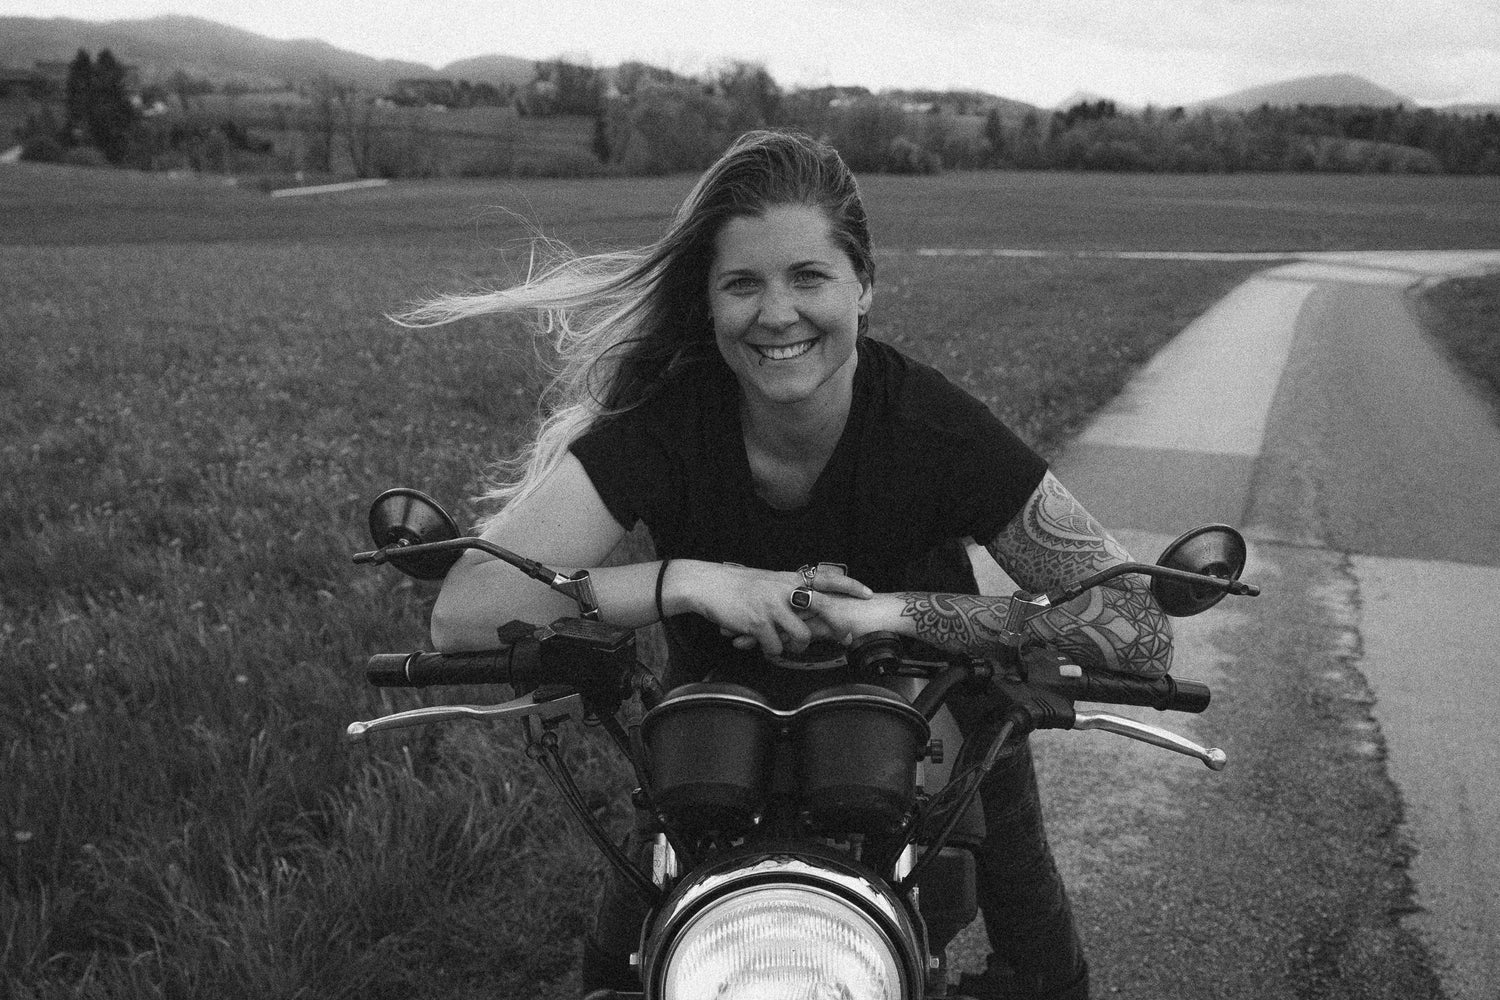 Woman with Tattoos on a motorcycle